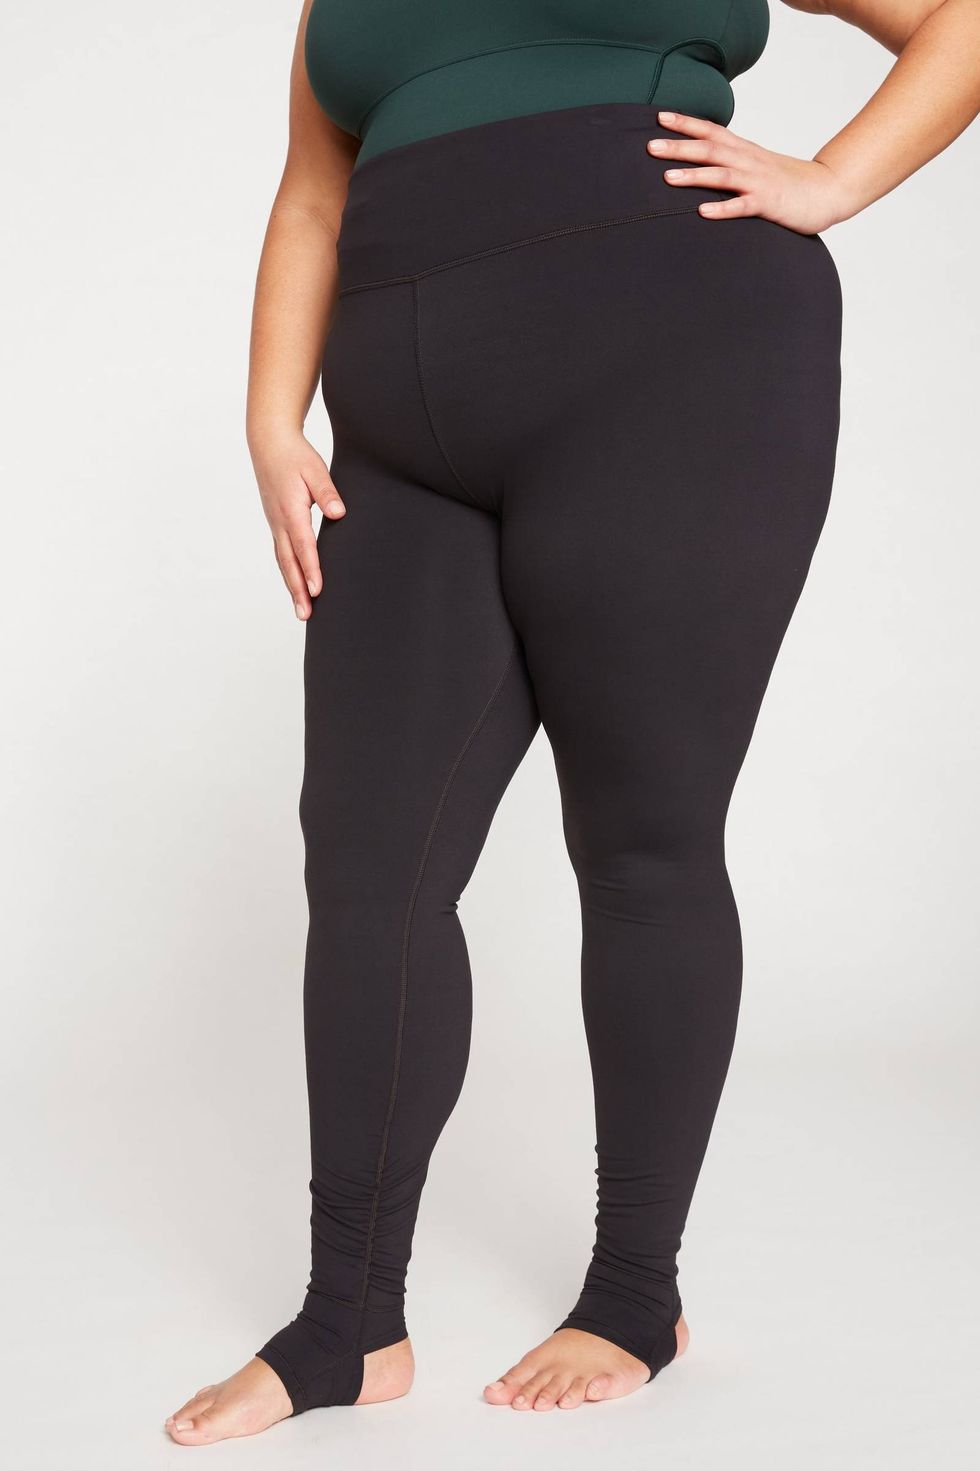 Quality Black Leggings for Dressing Up or Down - Cait Minschy